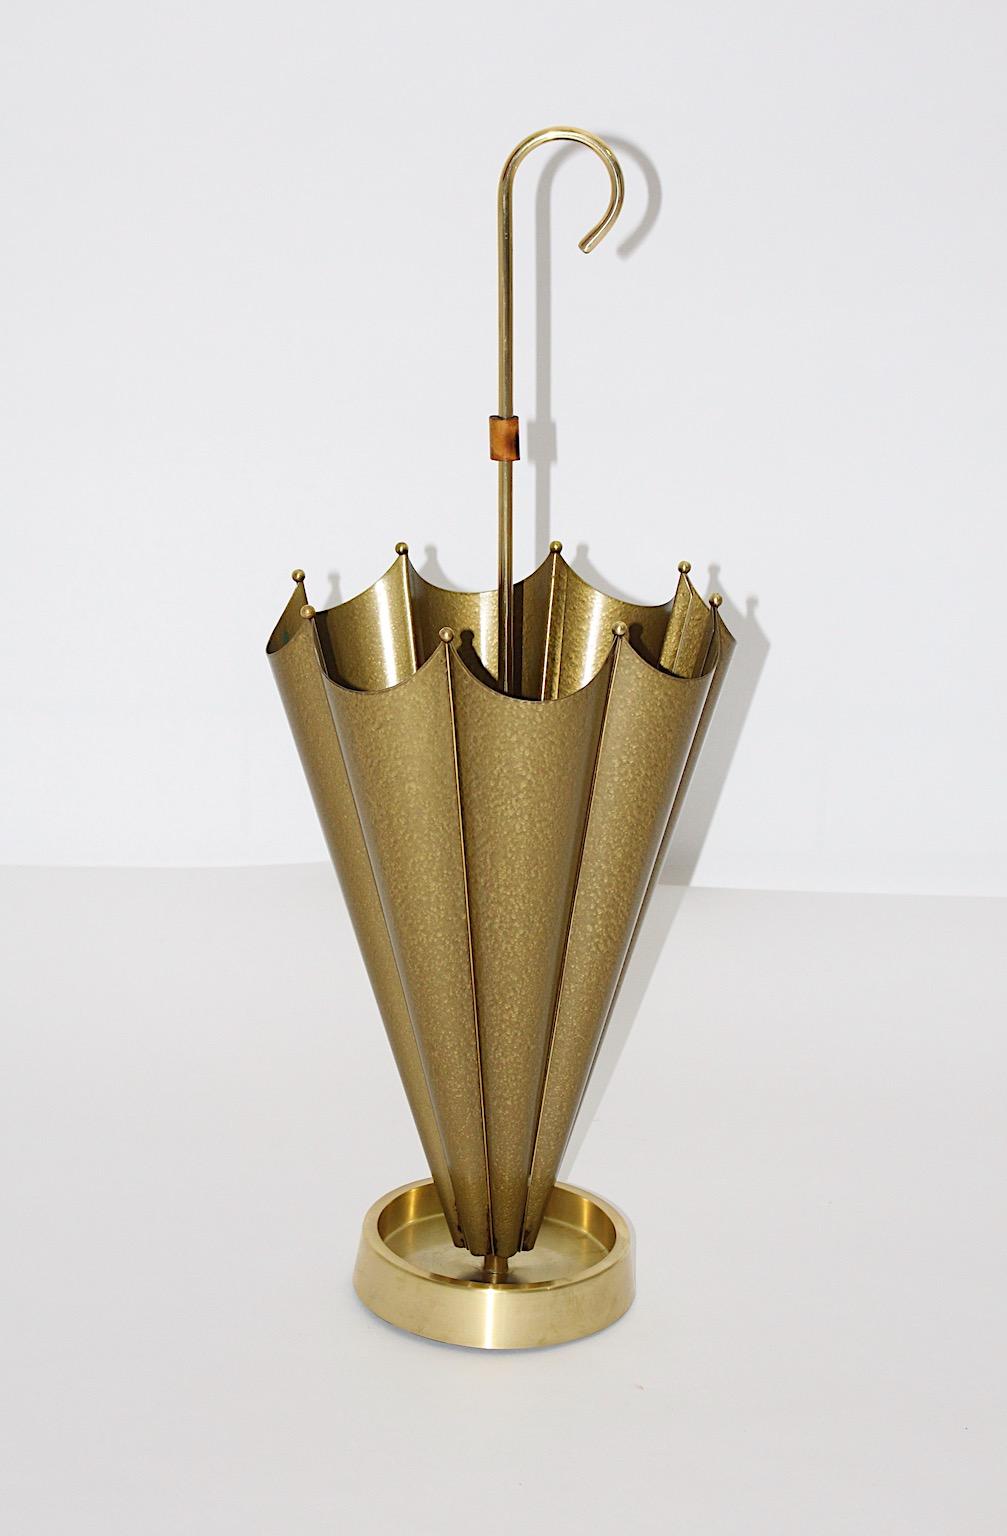 Italian Mid-Century Modern Vintage Golden Metal Bamboo Umbrella Stand Italy 1950s For Sale